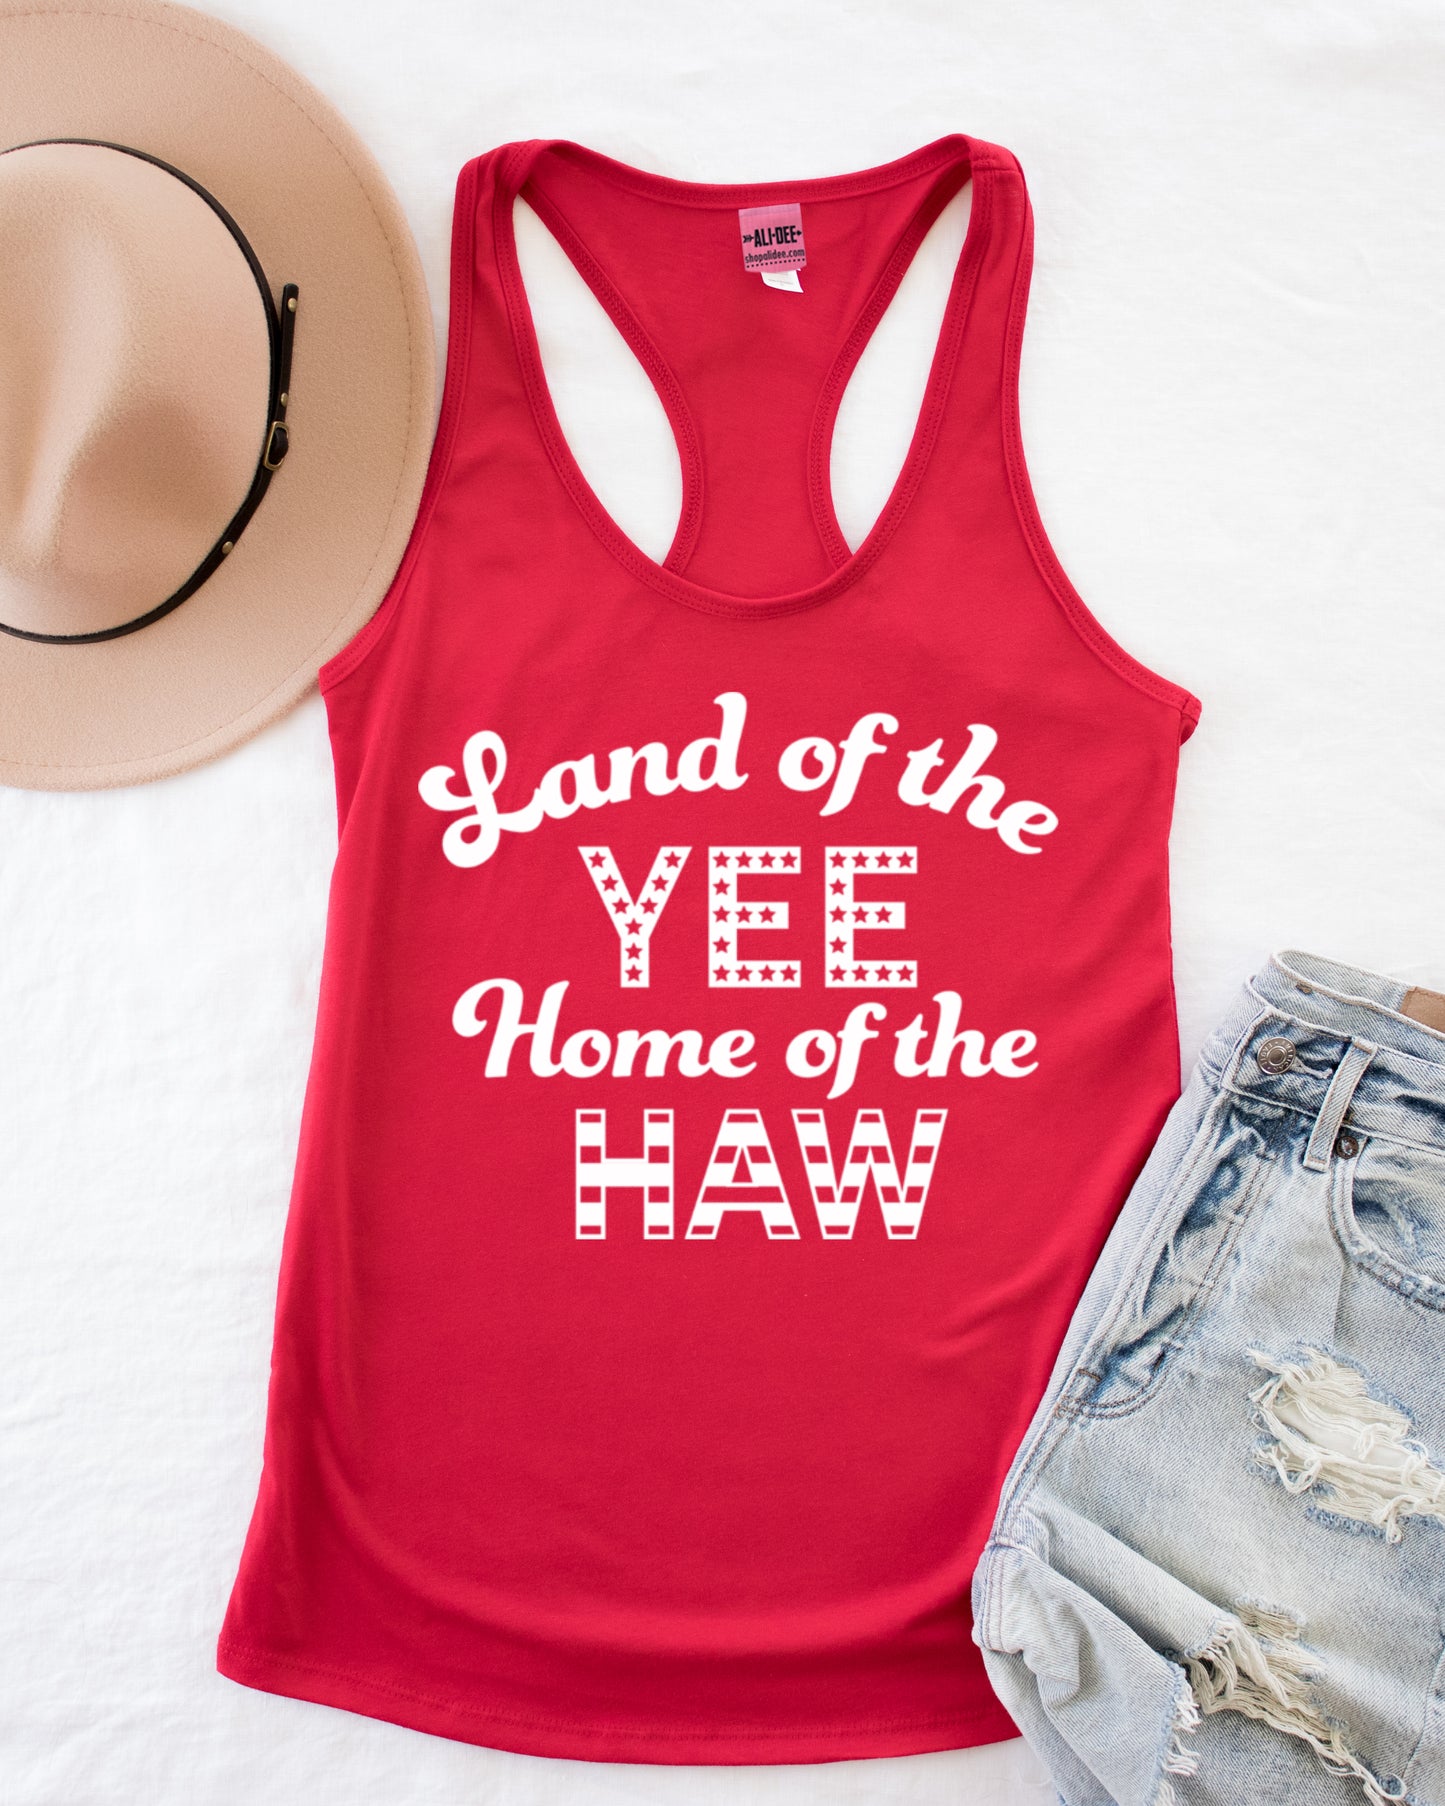 Land of the Yee Home of the Haw Western Graphic Tank - Red